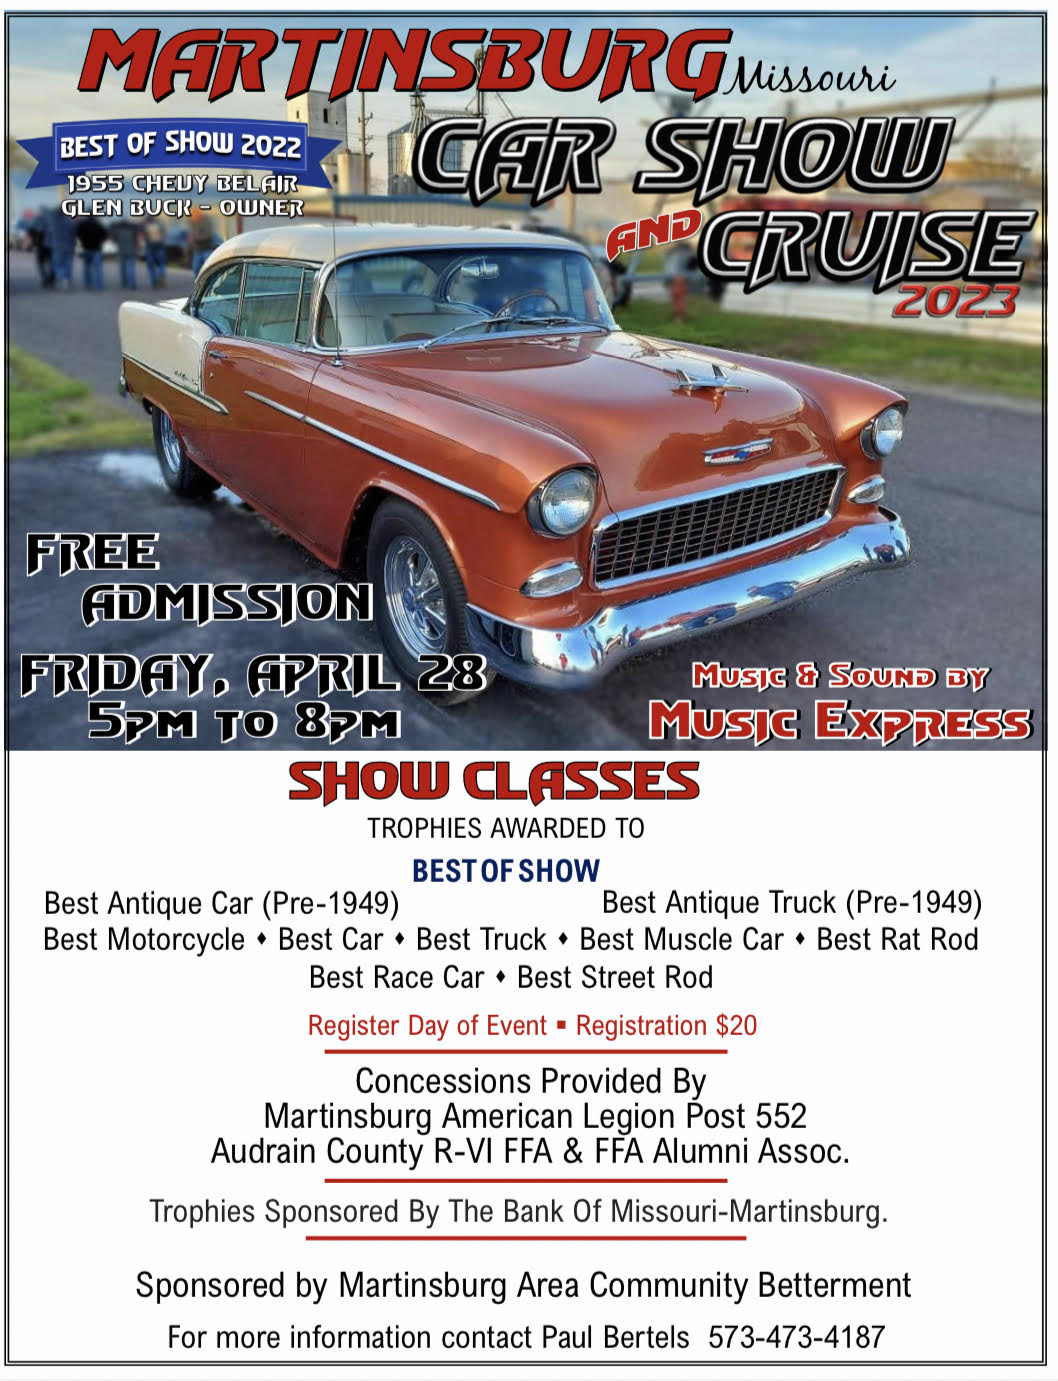 <h1 class="tribe-events-single-event-title">Martinsburg Car Show and Cruise 2023</h1>